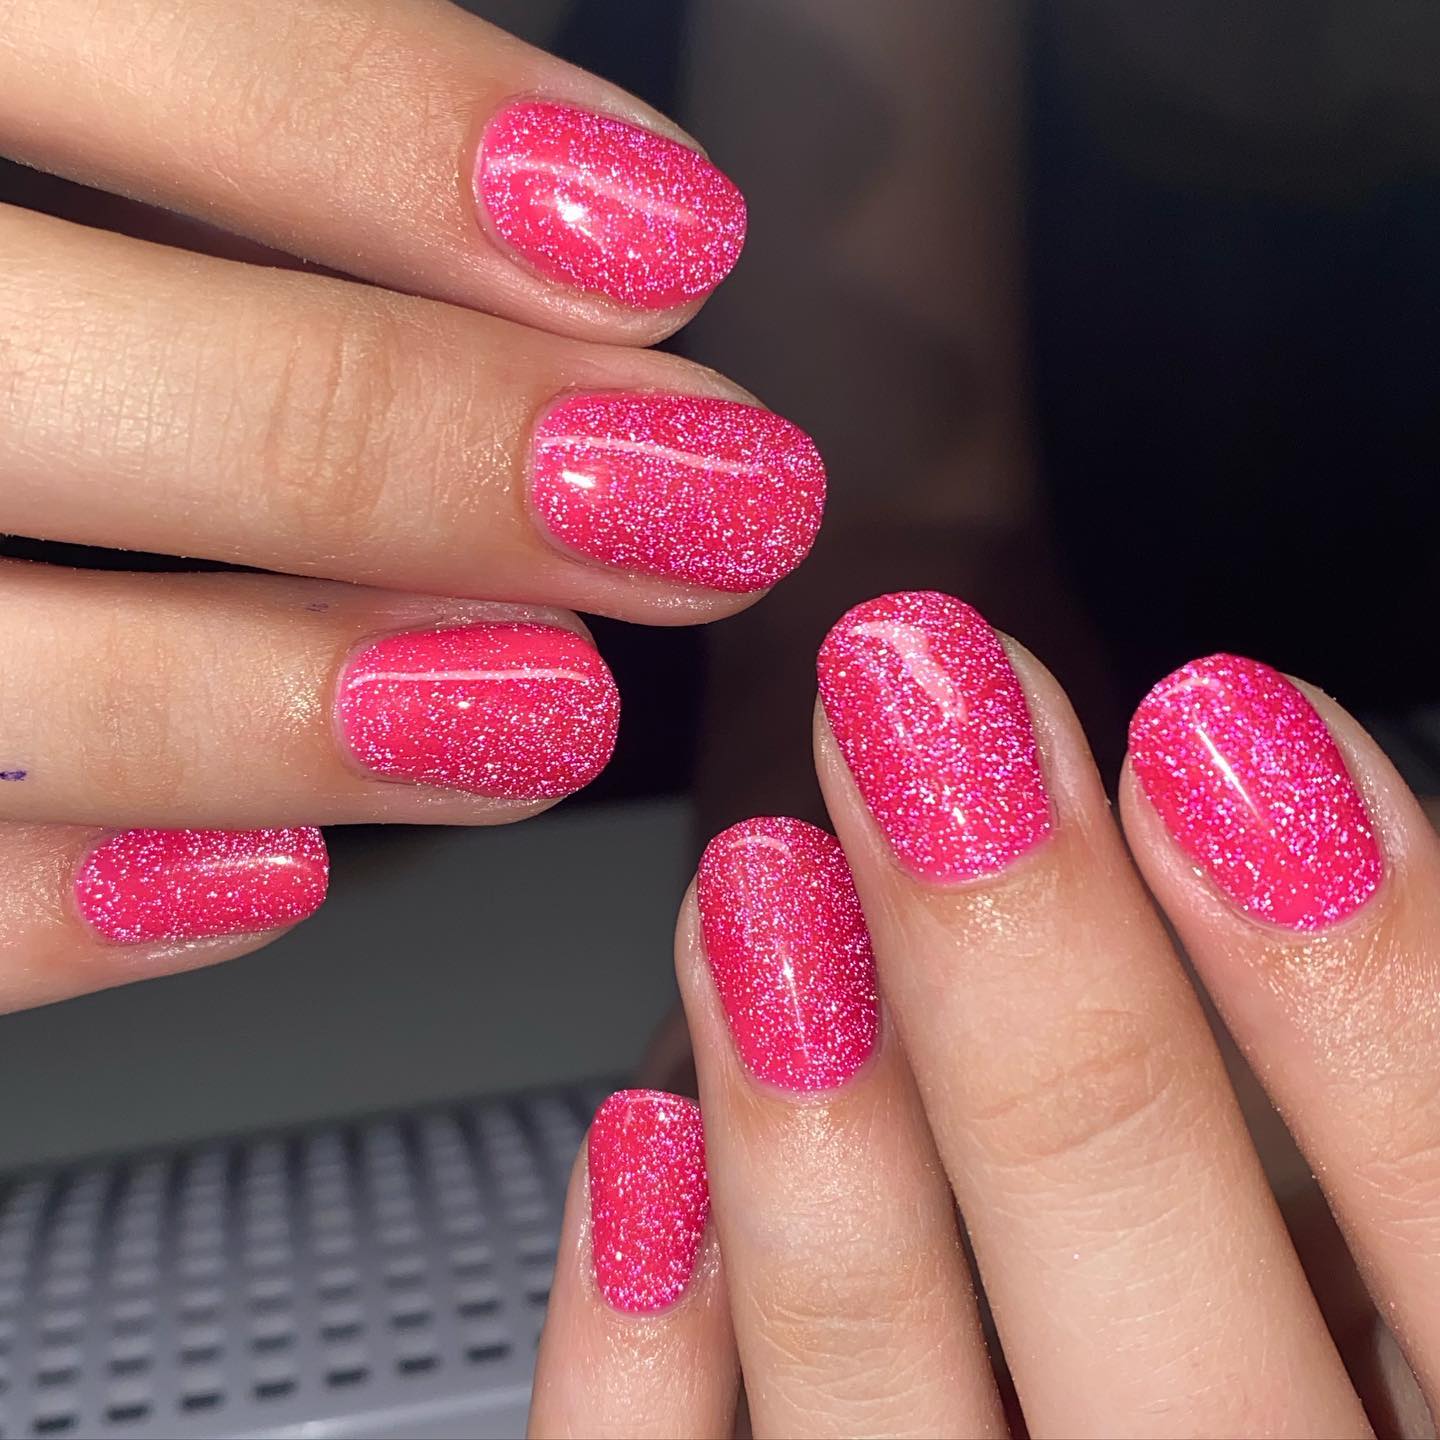 Shimmery nails and this glowy outcome will look amazing for the Christmas or holiday season.